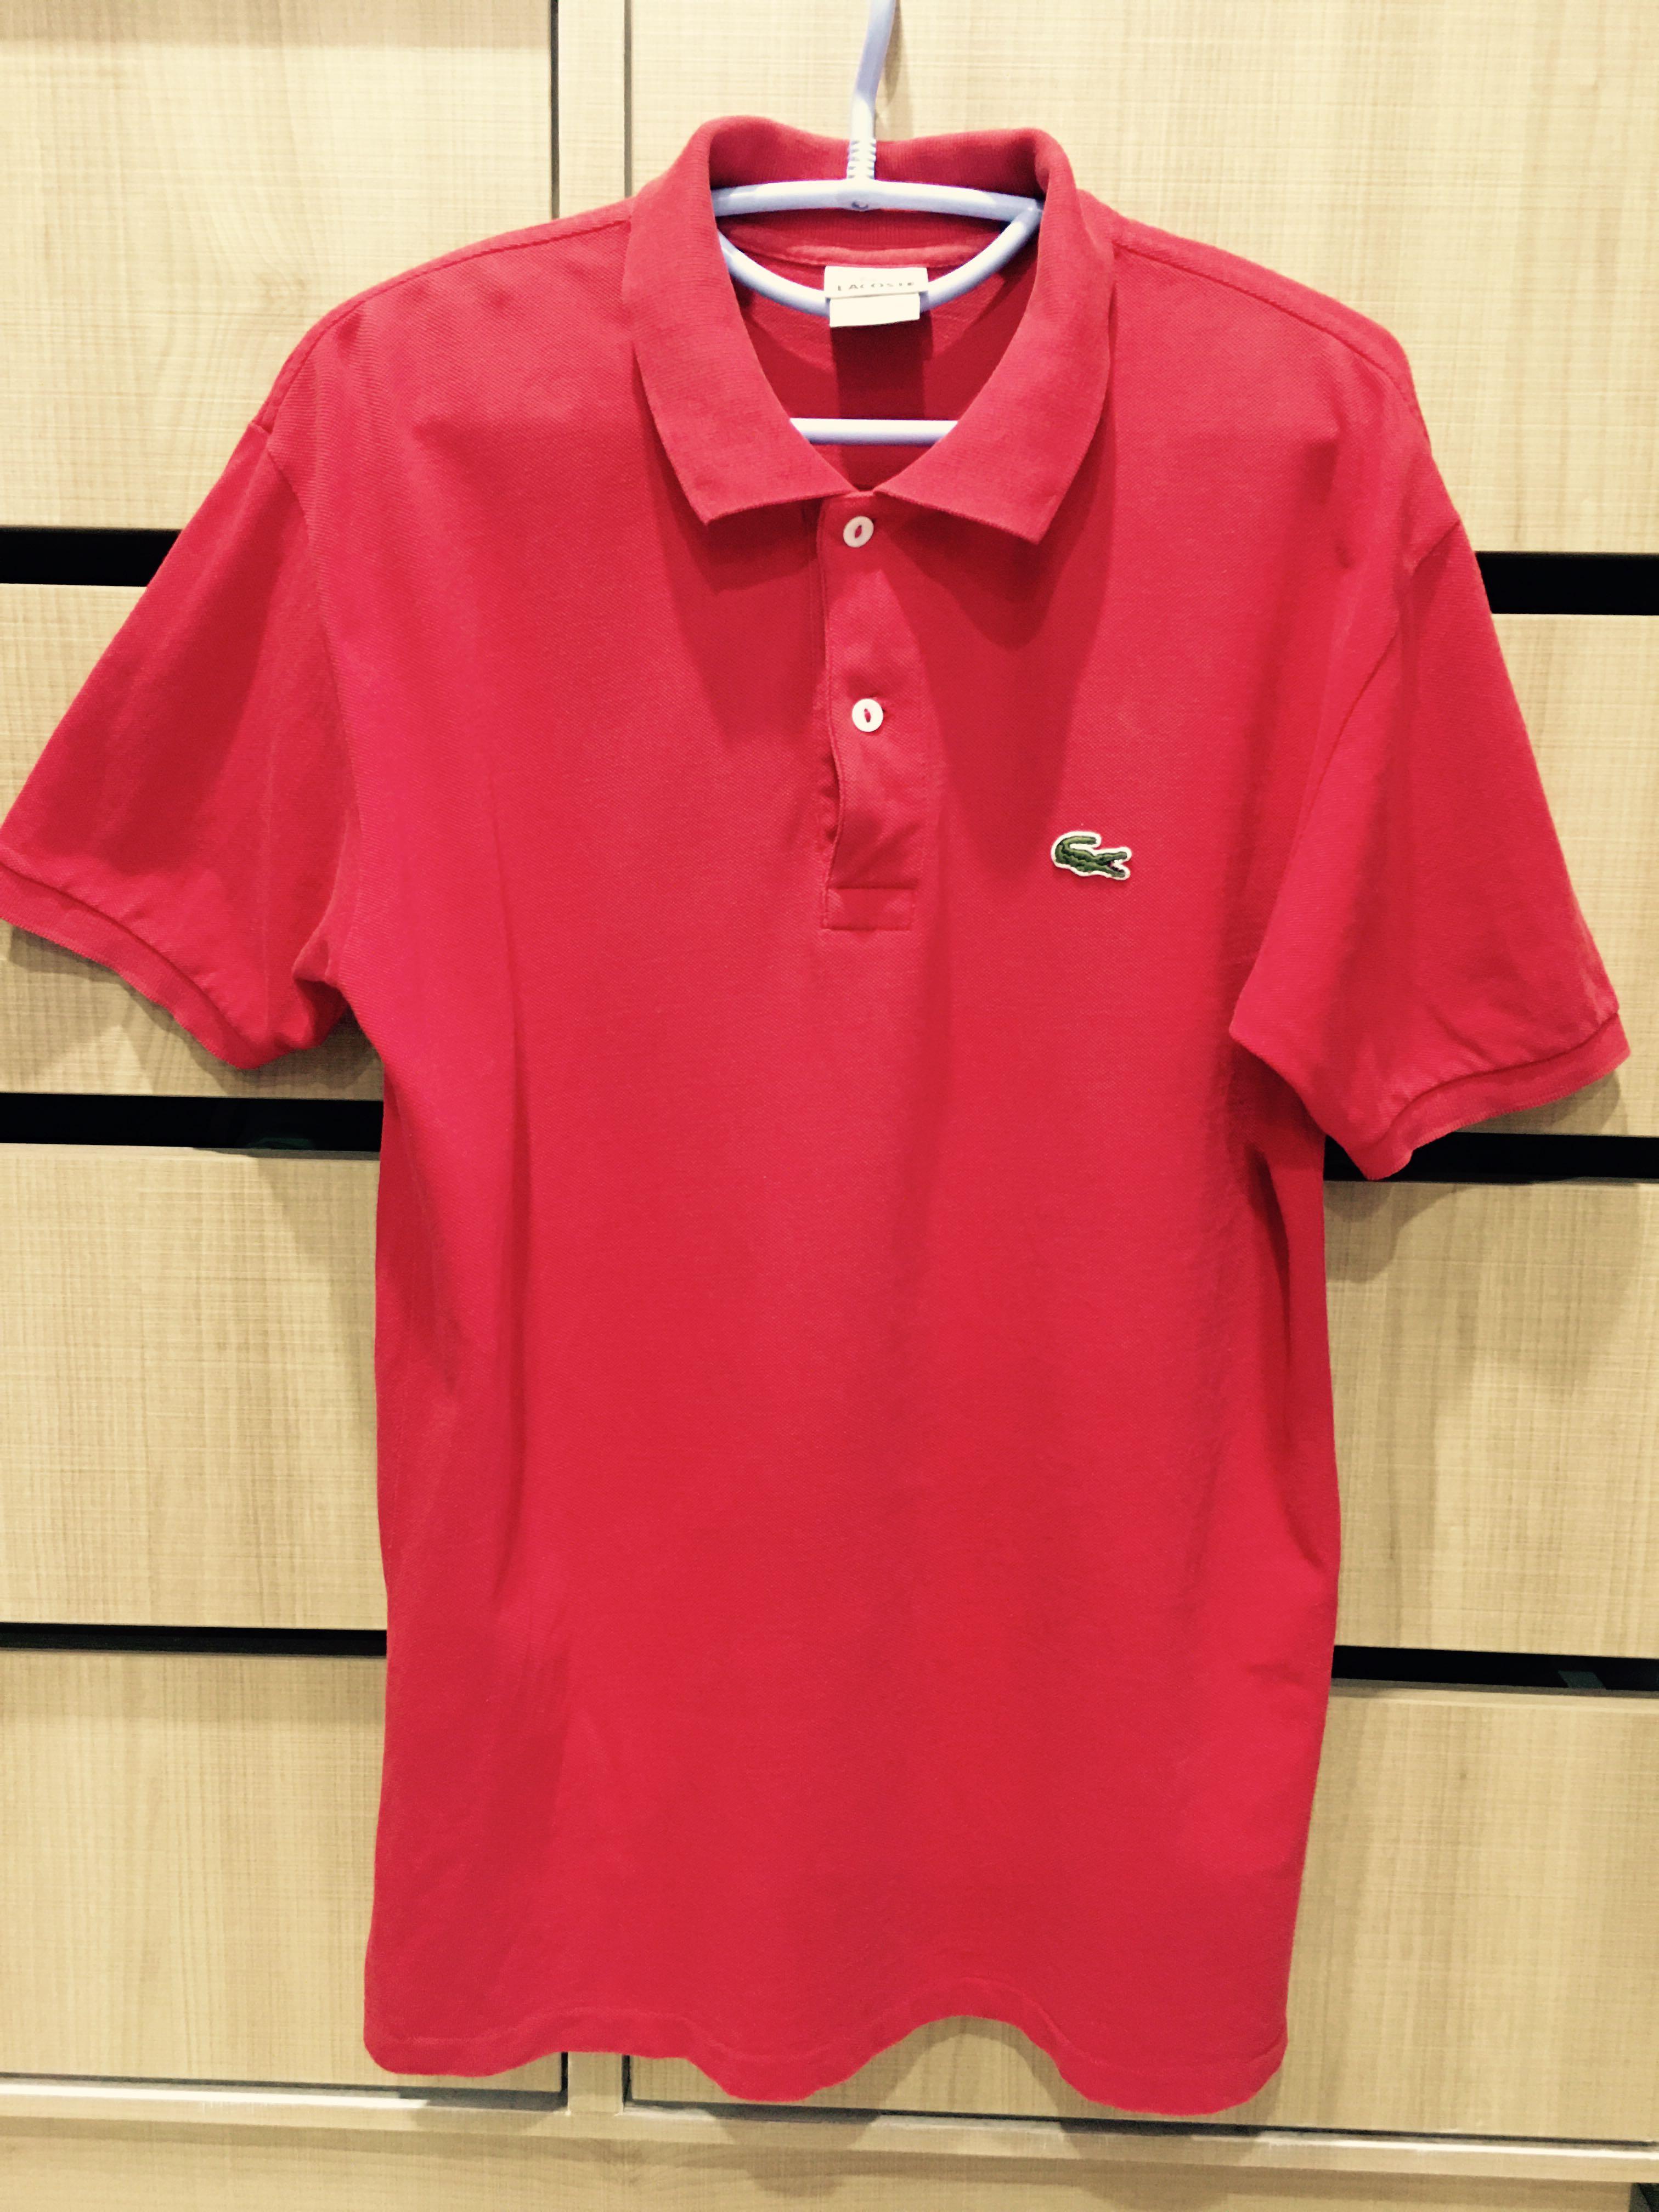 very lacoste t shirt